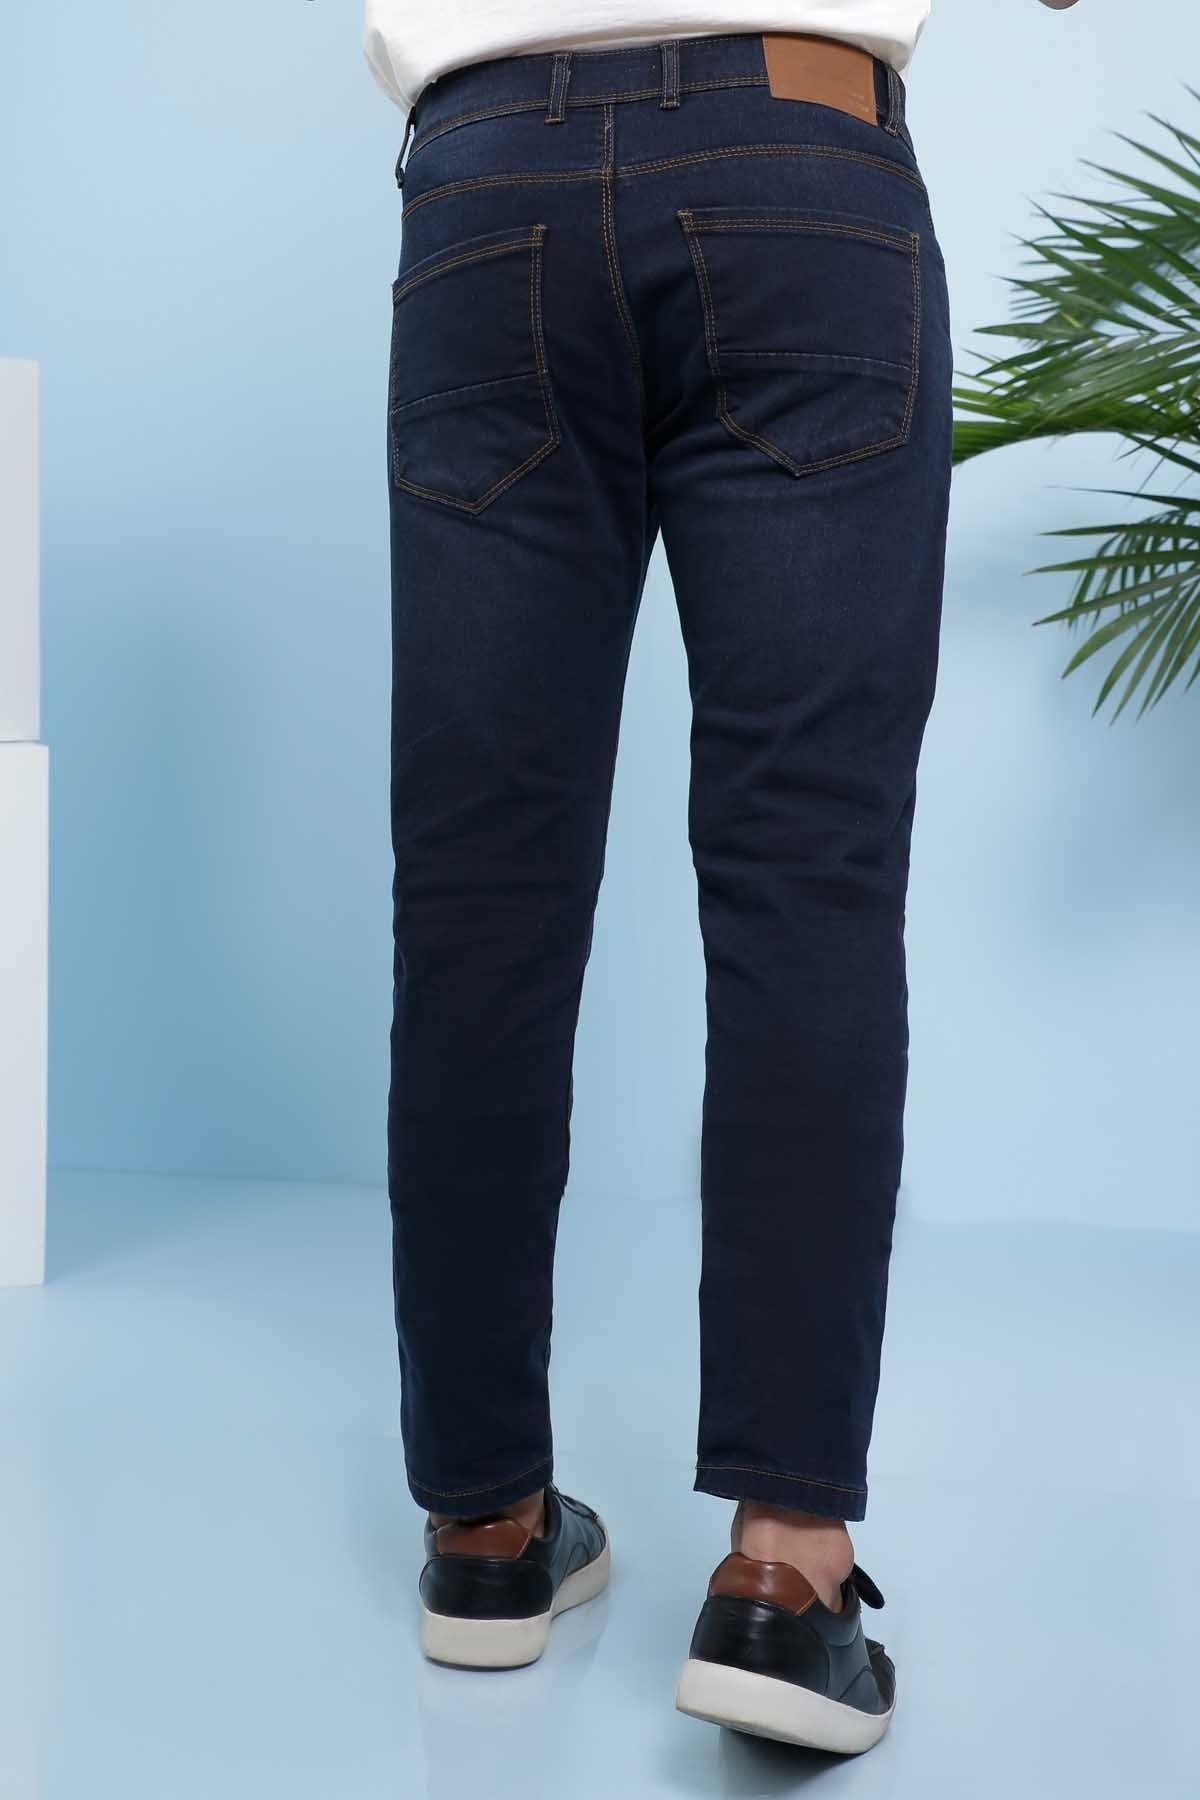 JEAN SLIM FIT MID NAVY at Charcoal Clothing